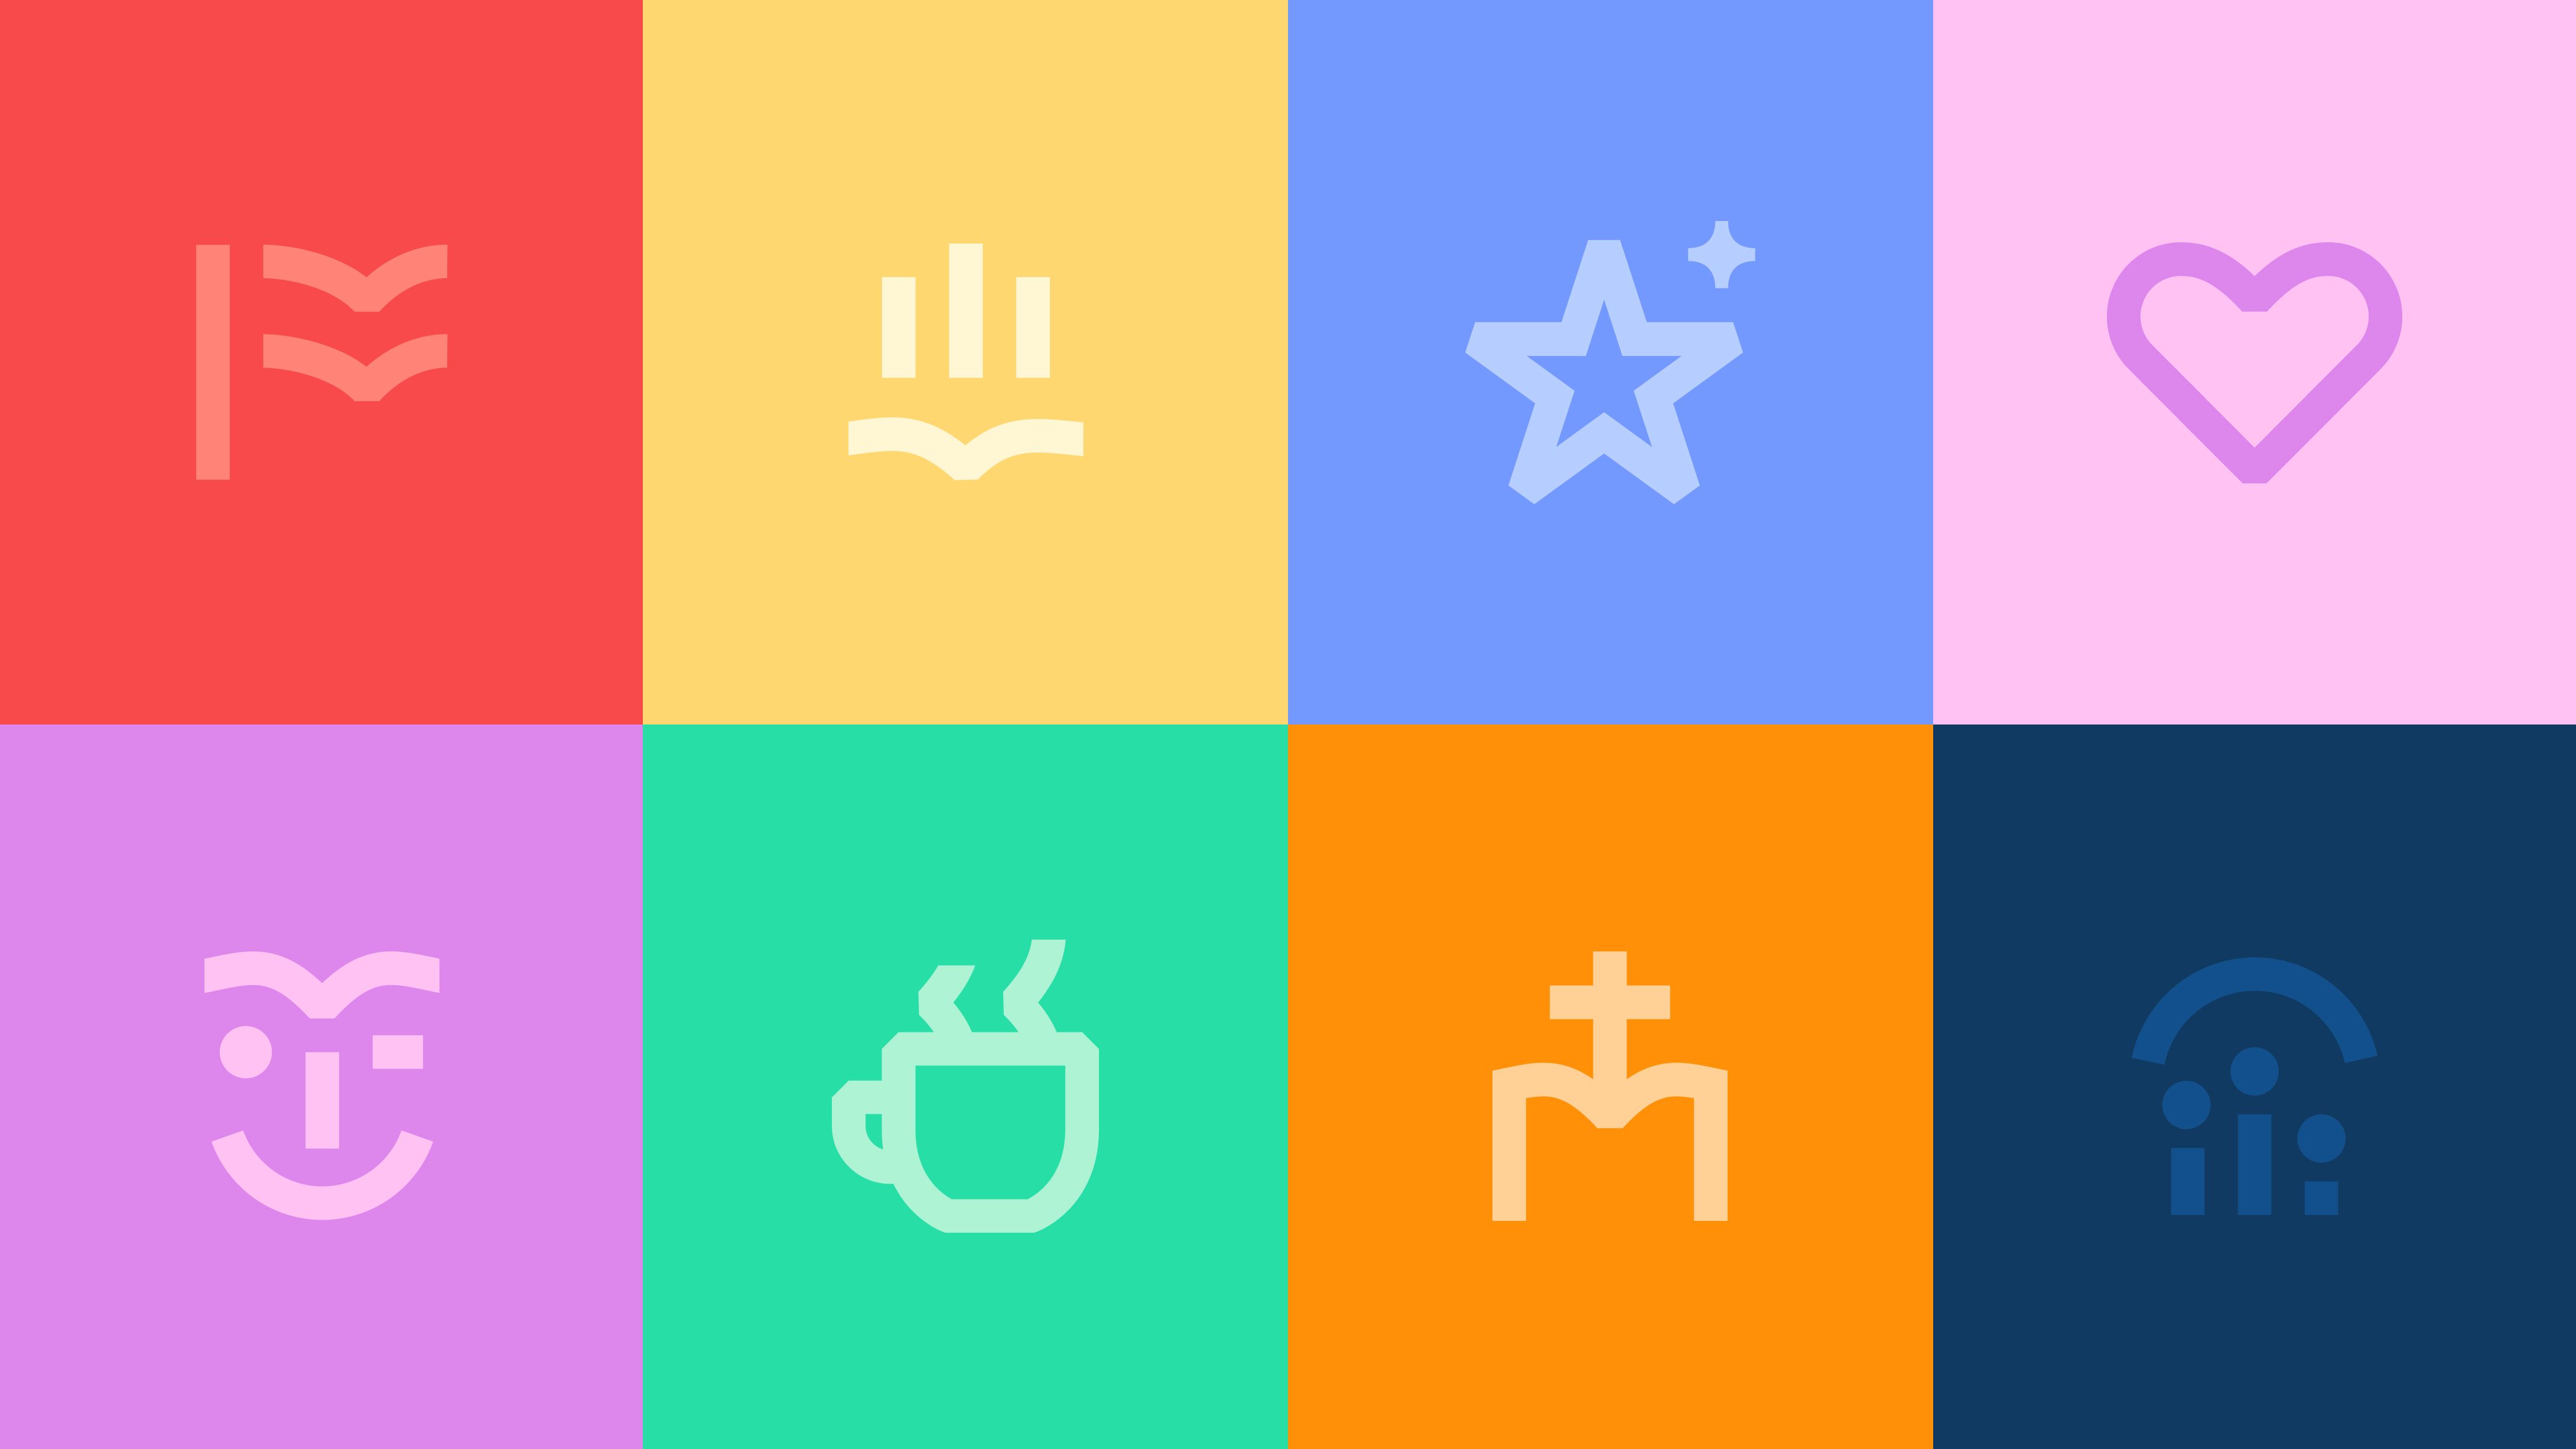 Icons on a colourful background